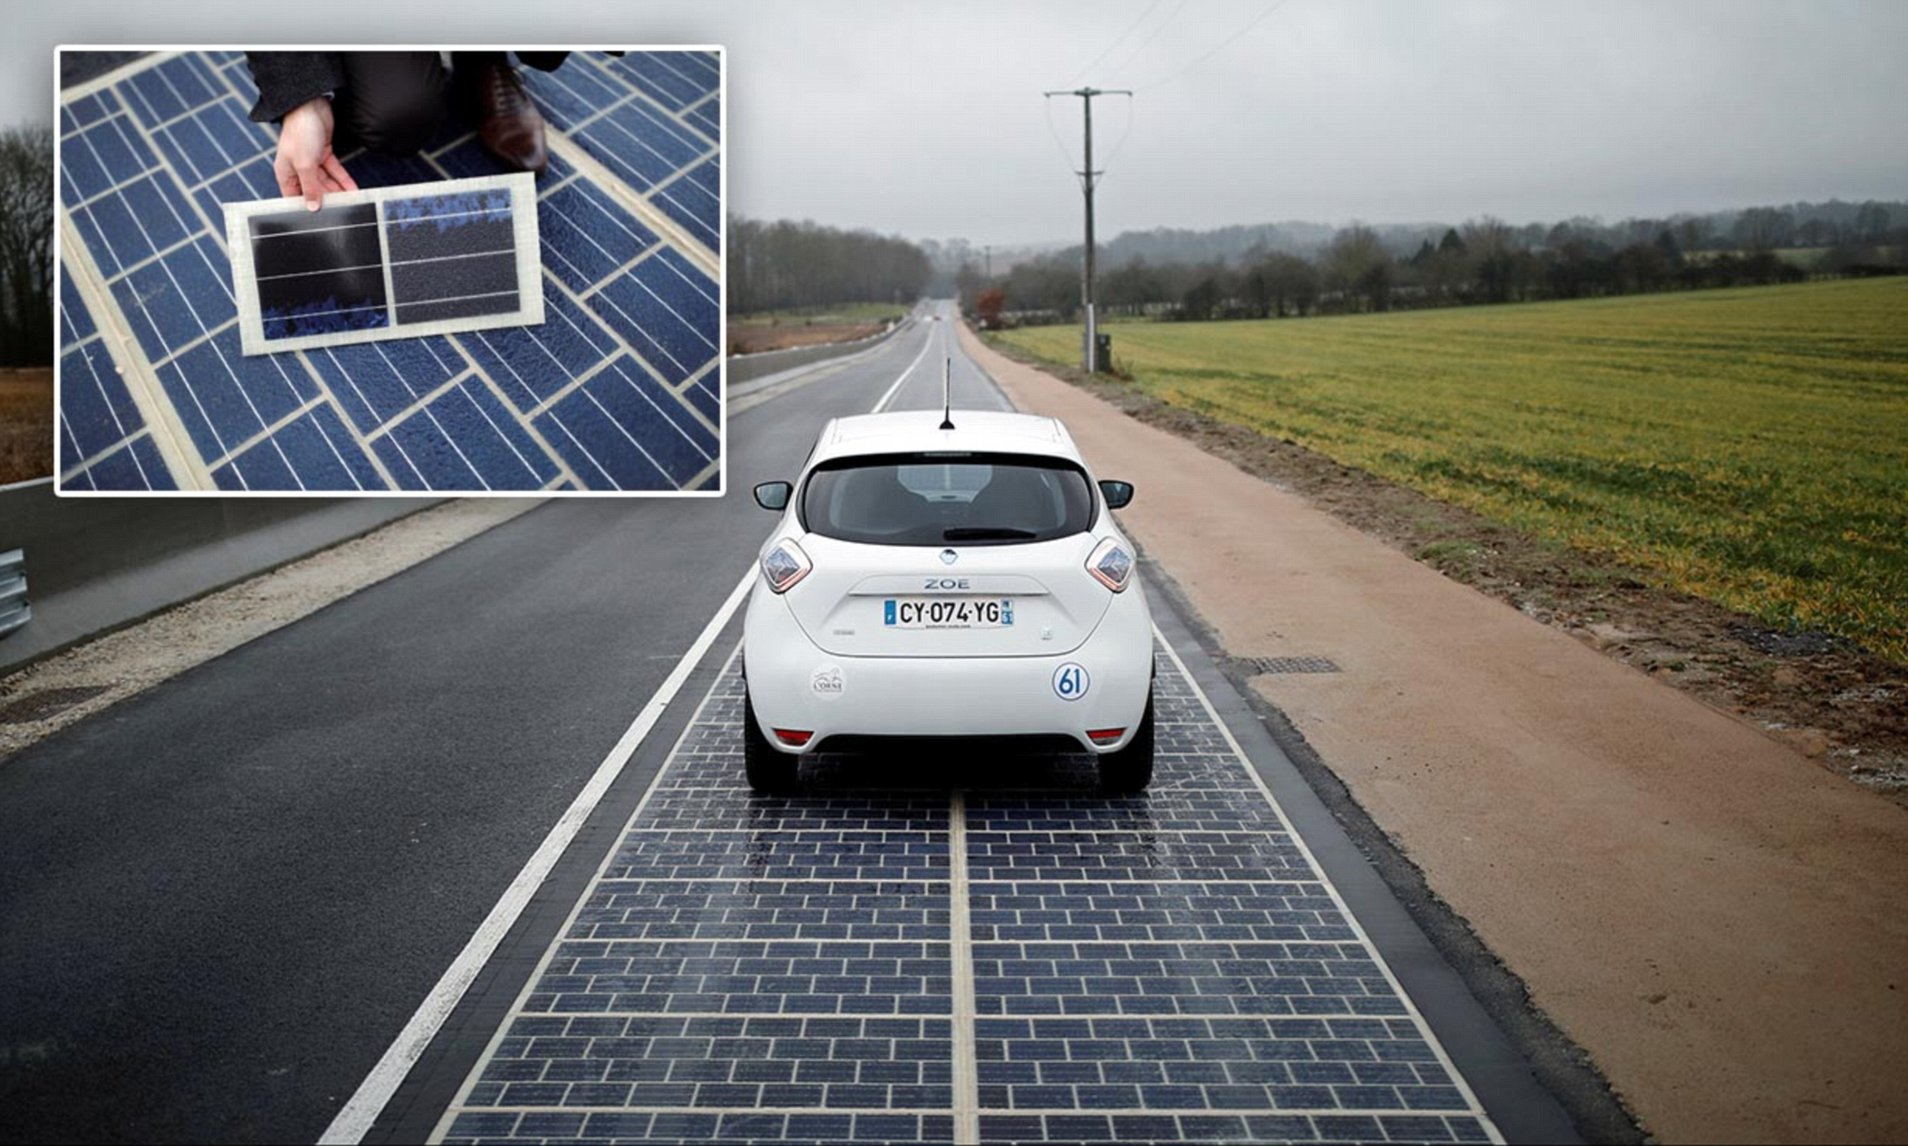 Photovoltaic Road Experiment In France Was A Disaster